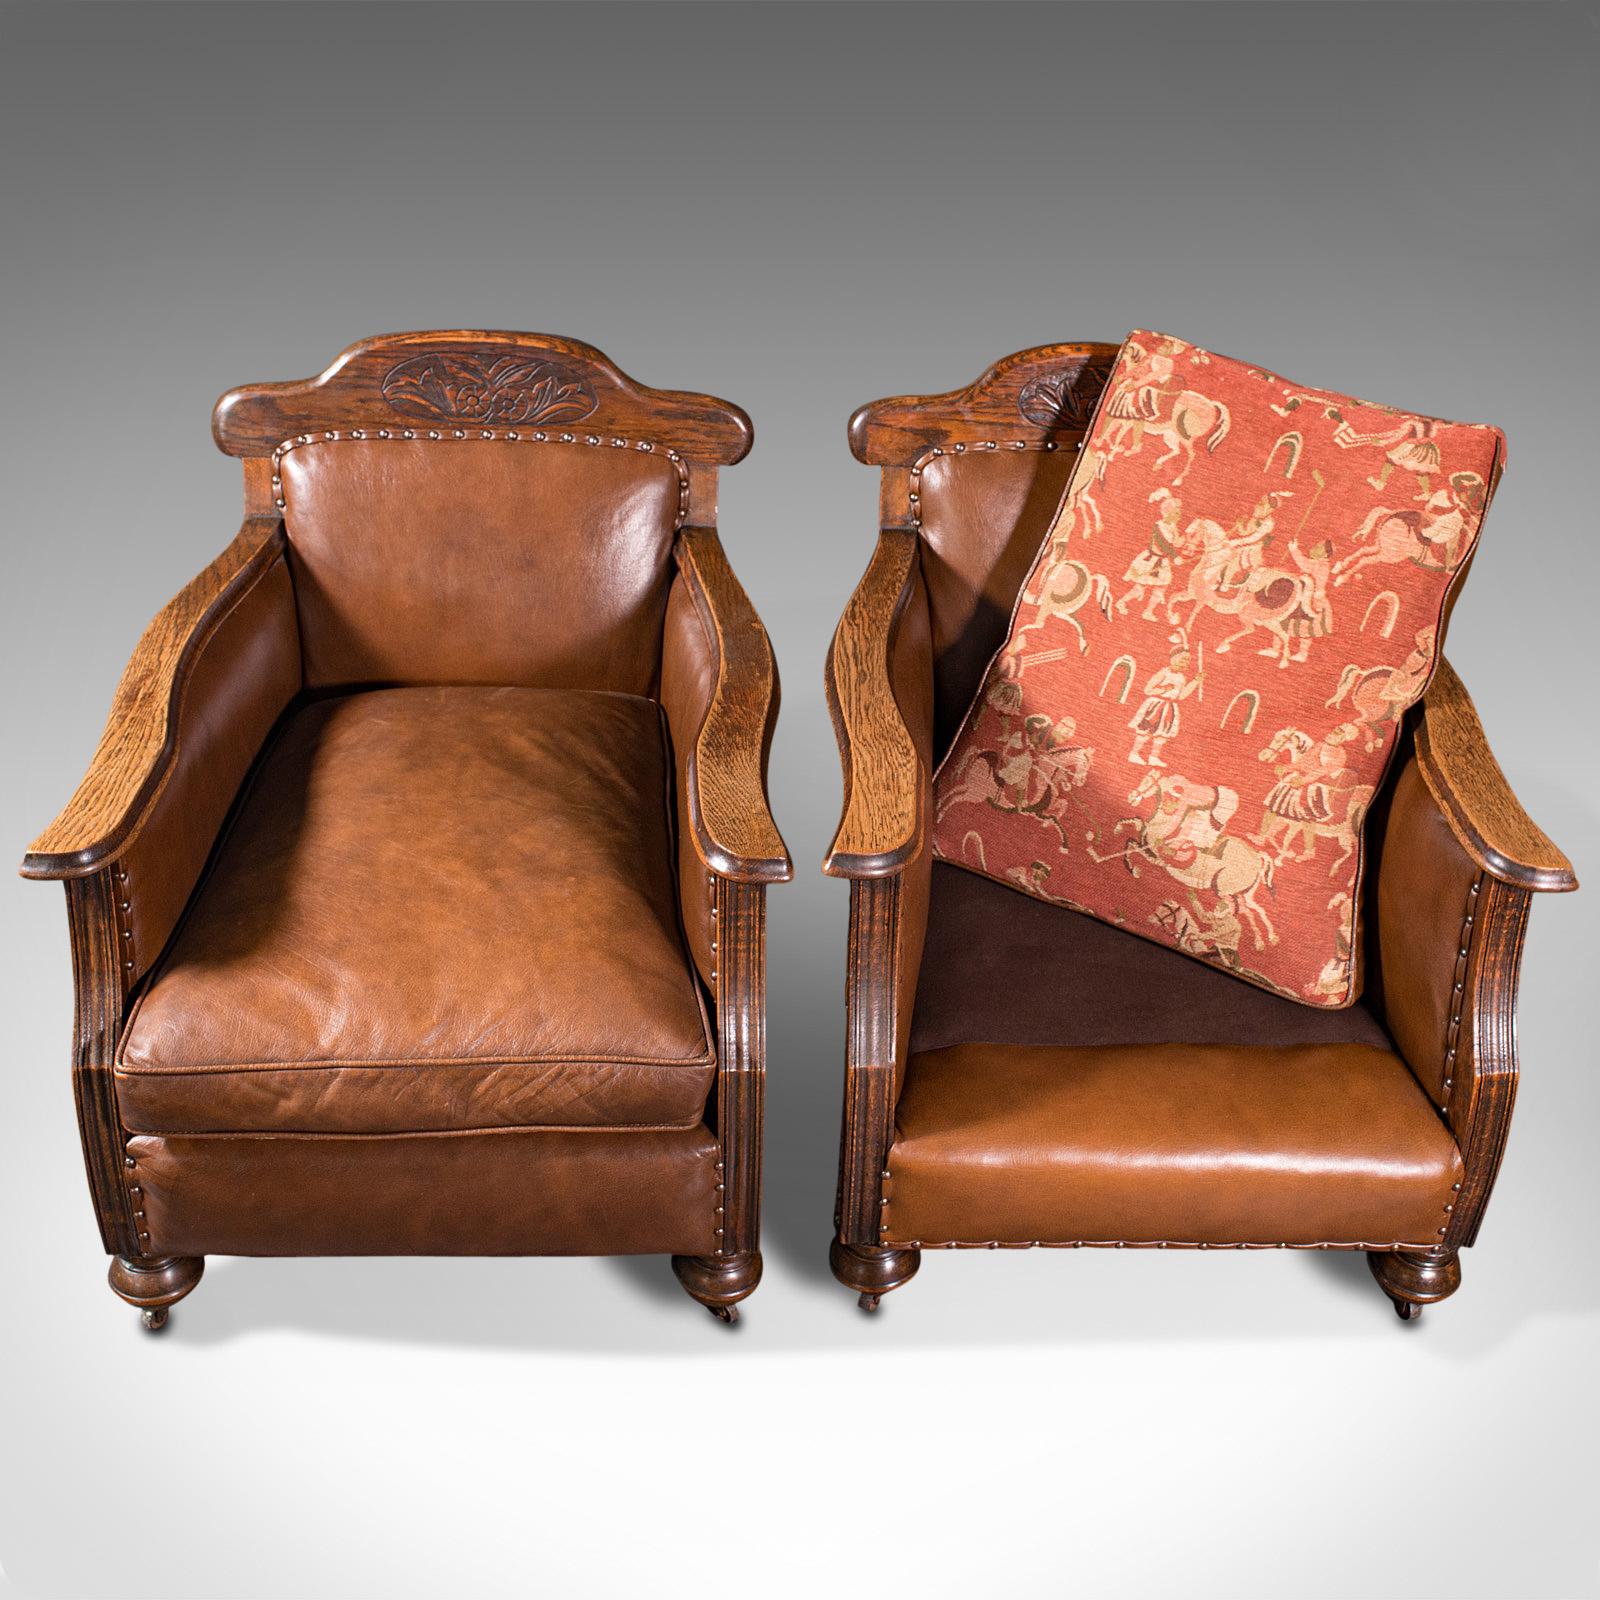 Pair of, Antique Gentleman's Club Chairs, Leather, Fireside, Seat, Edwardian 3